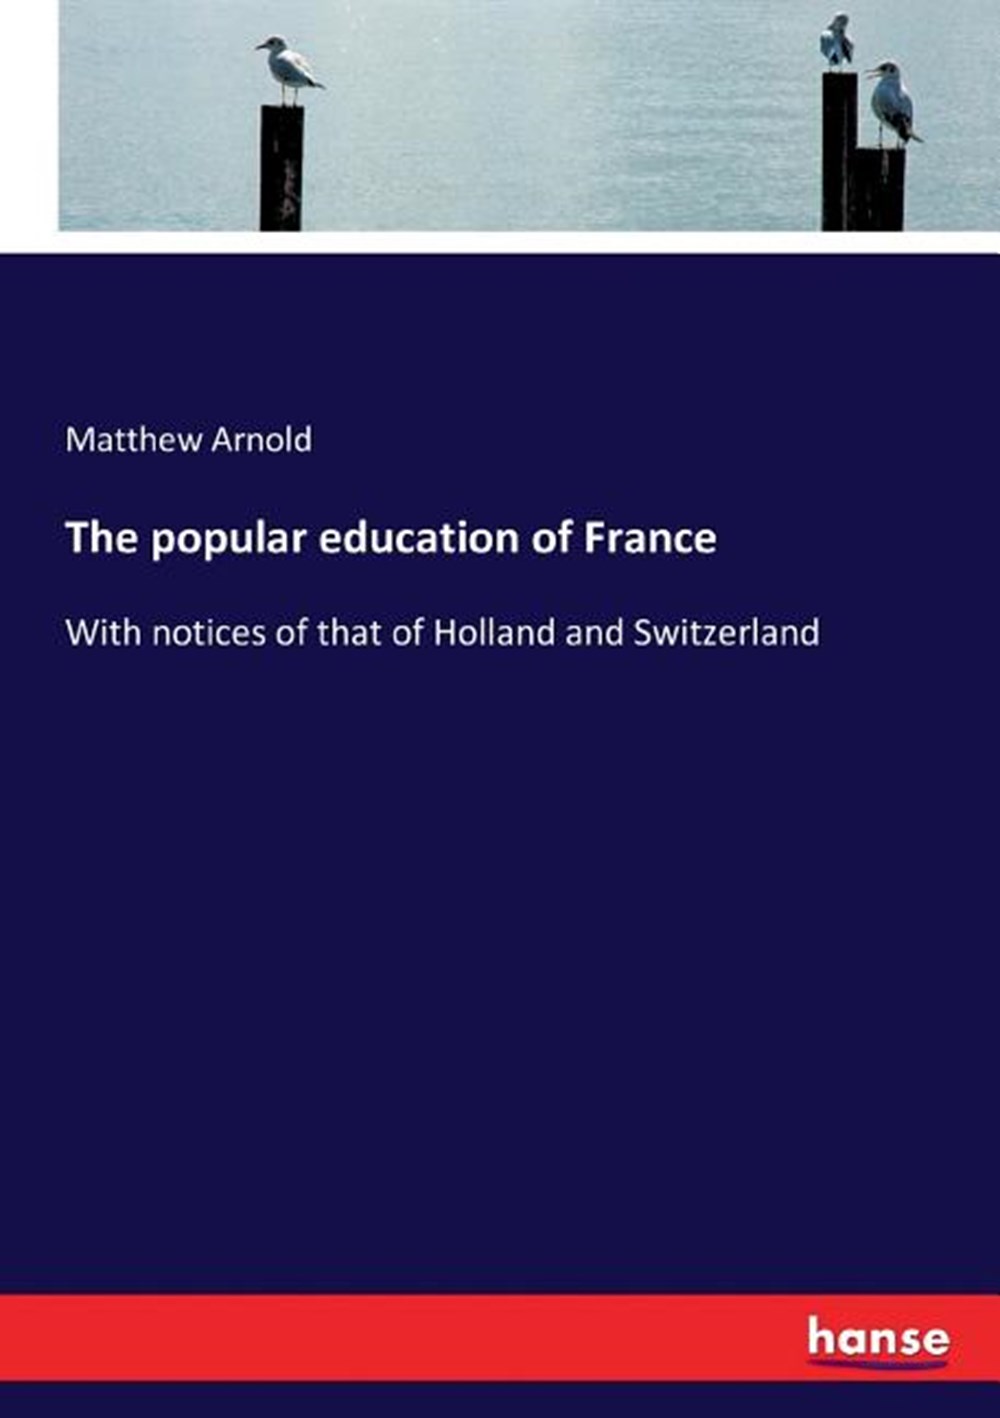 popular education of France: With notices of that of Holland and Switzerland